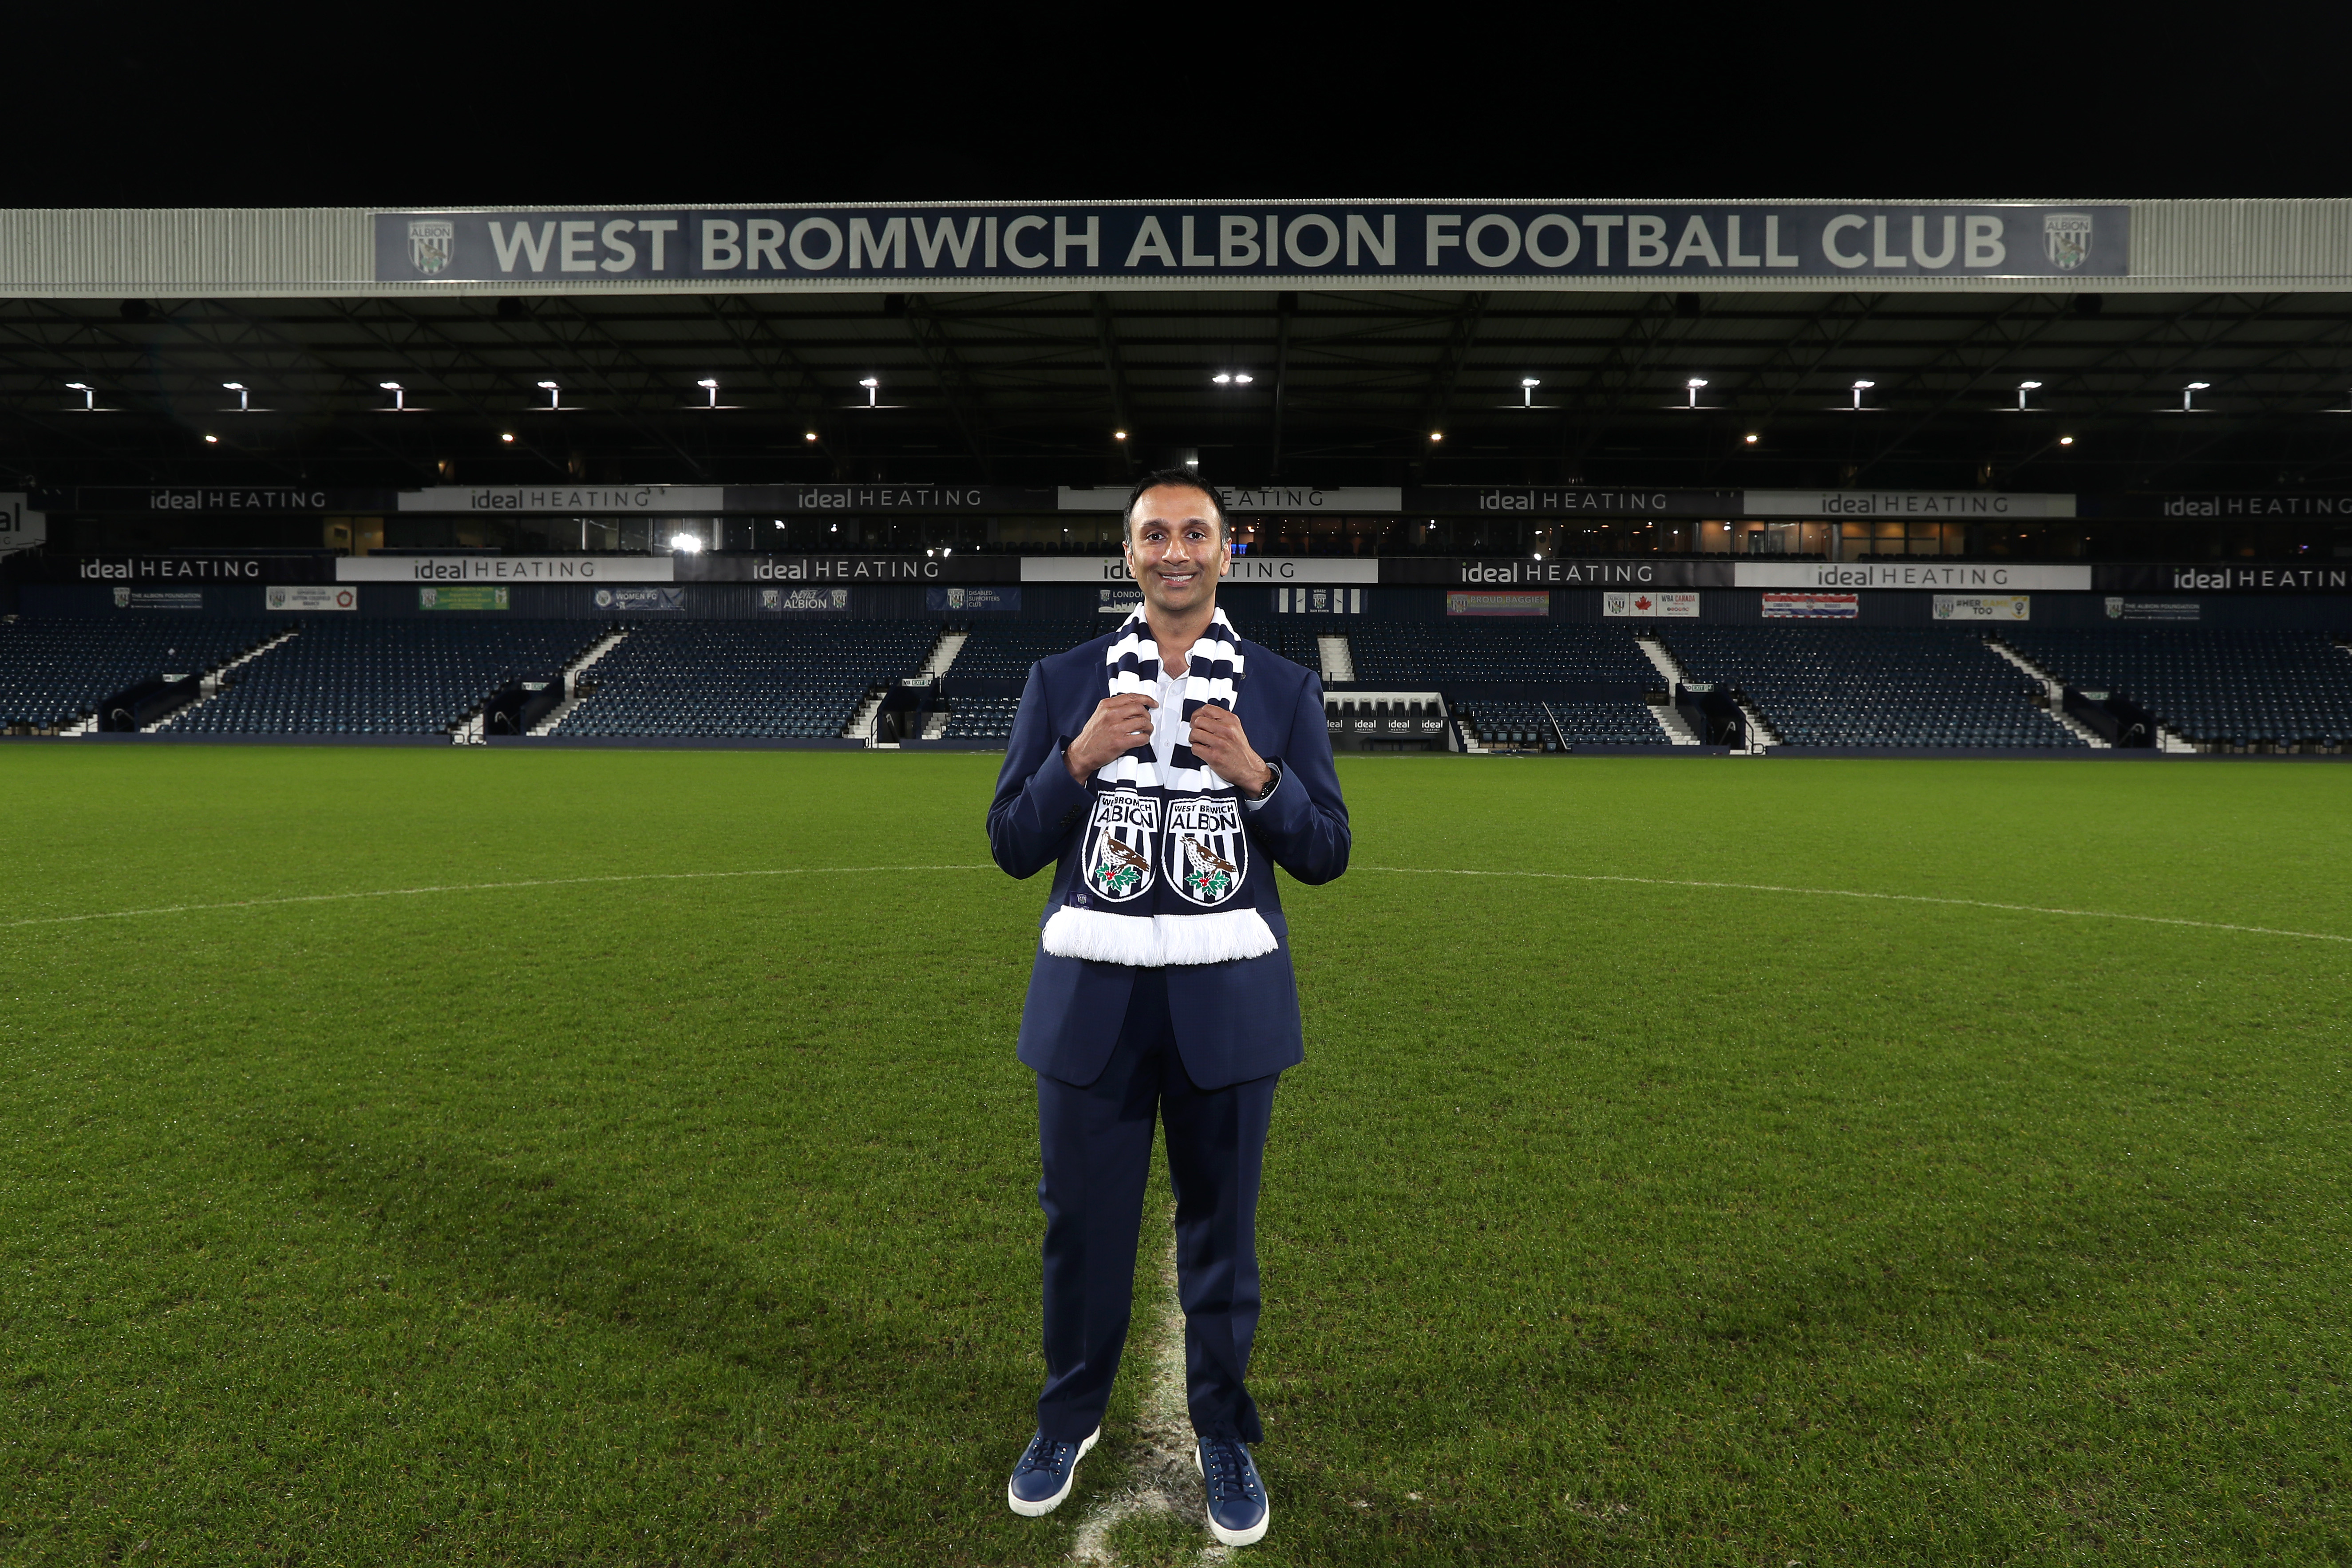 Shilen Patel stood on the pitch at The Hawthorns smiling at camera with the West Stand in the background and an Albion scarf wrapped round his neck